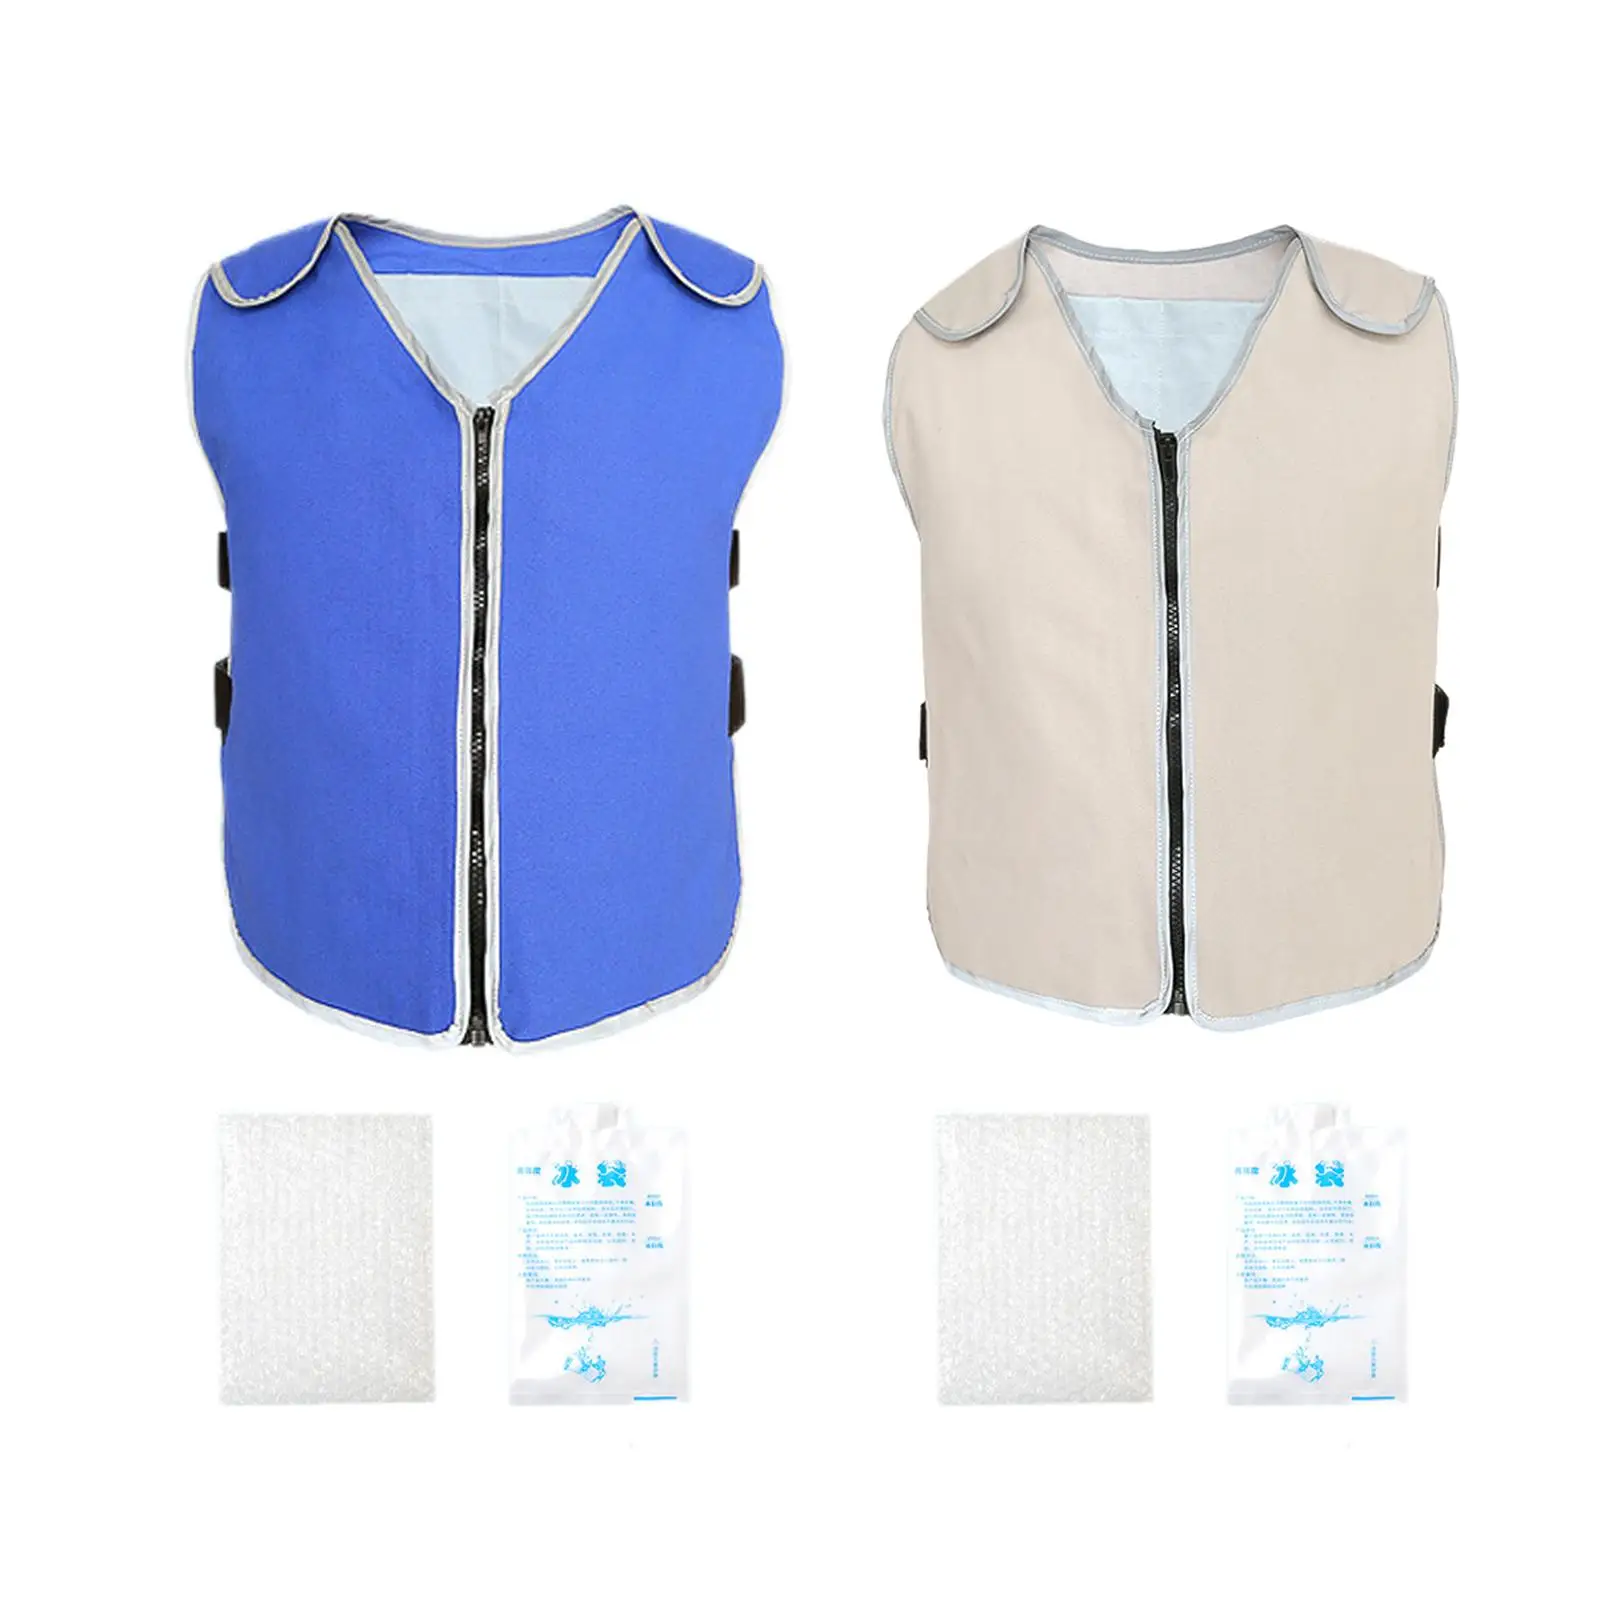 Reusable Cooling Safety Vest with Reflective Strip Zipper for Men Women